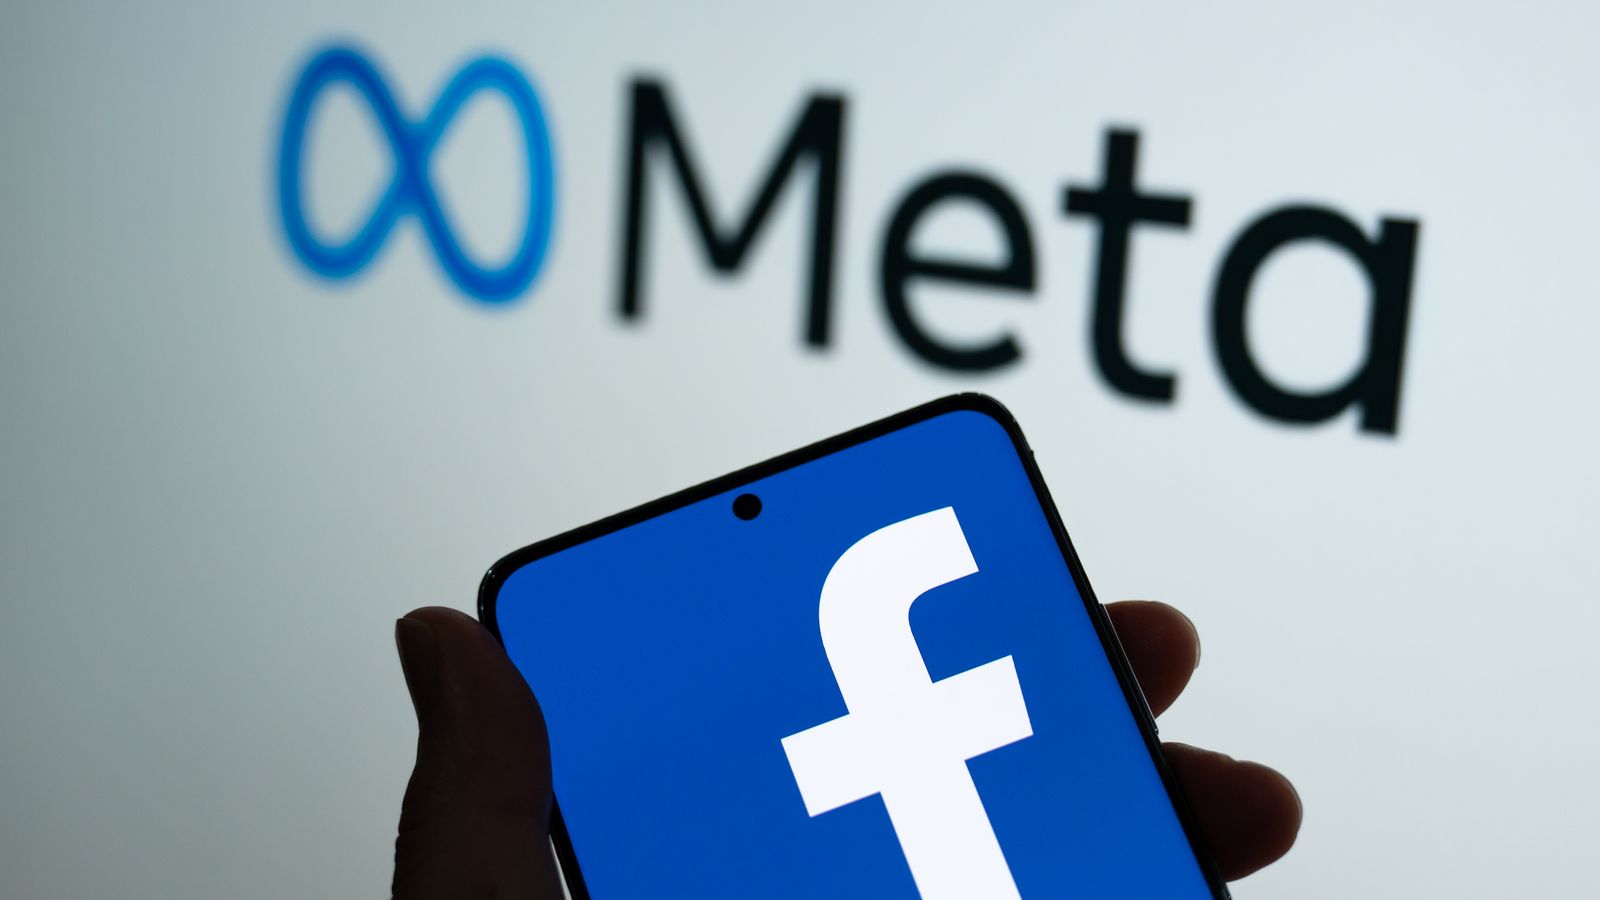 Facebook owner Meta reports first ever revenue drop amid lower advertising sales and competition from TikTok